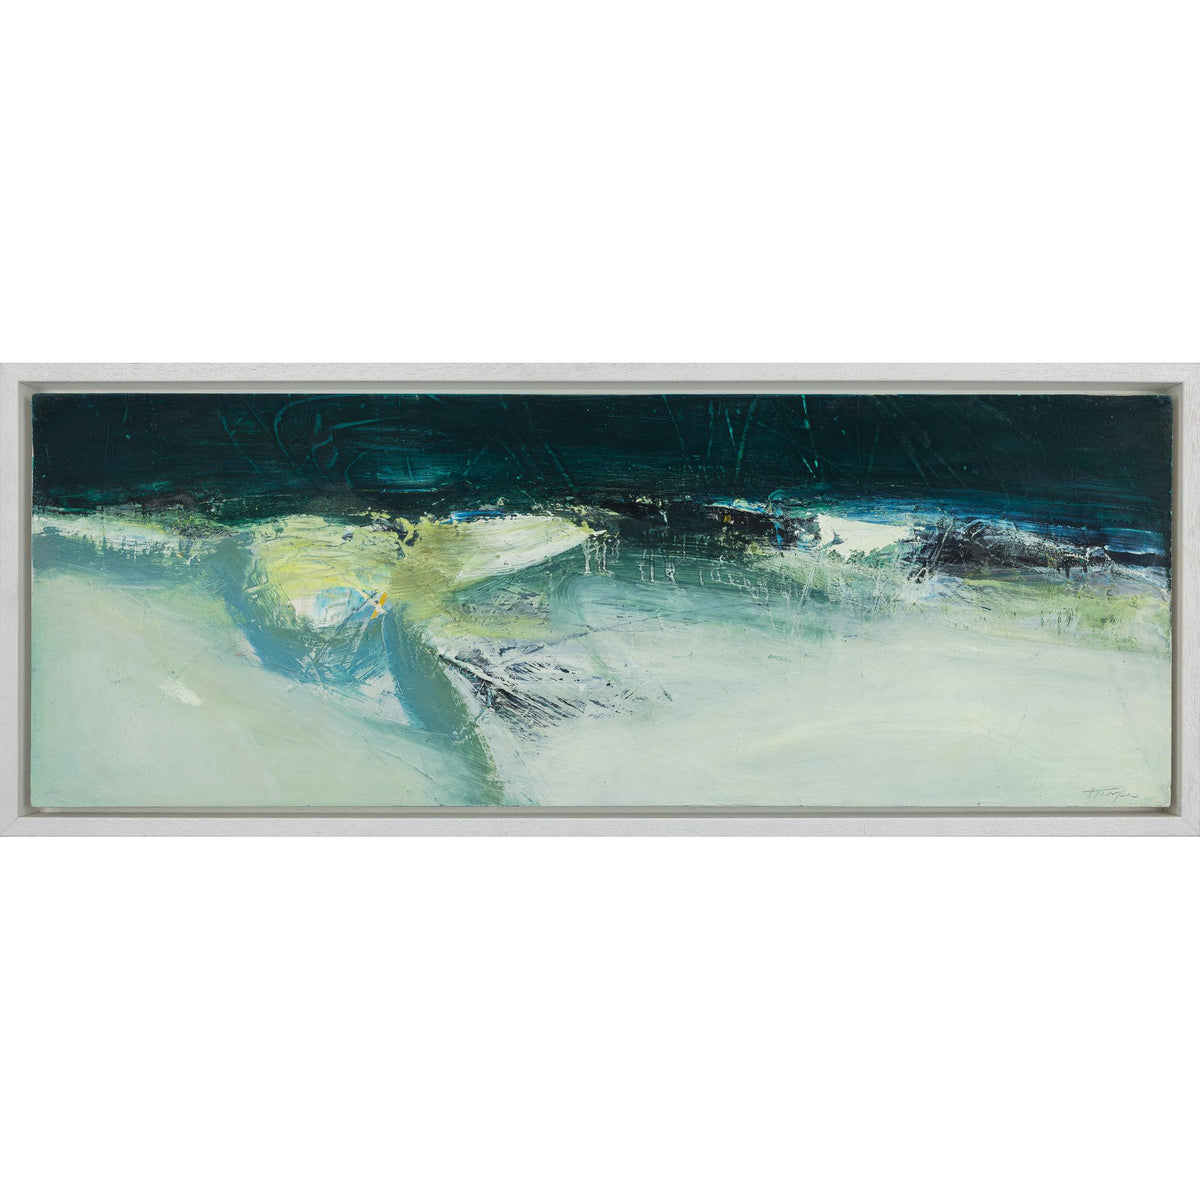 &#39;Emerald Coastal&#39; oil original by Justine Lois Thorpe, available at Padstow Gallery, Cornwall